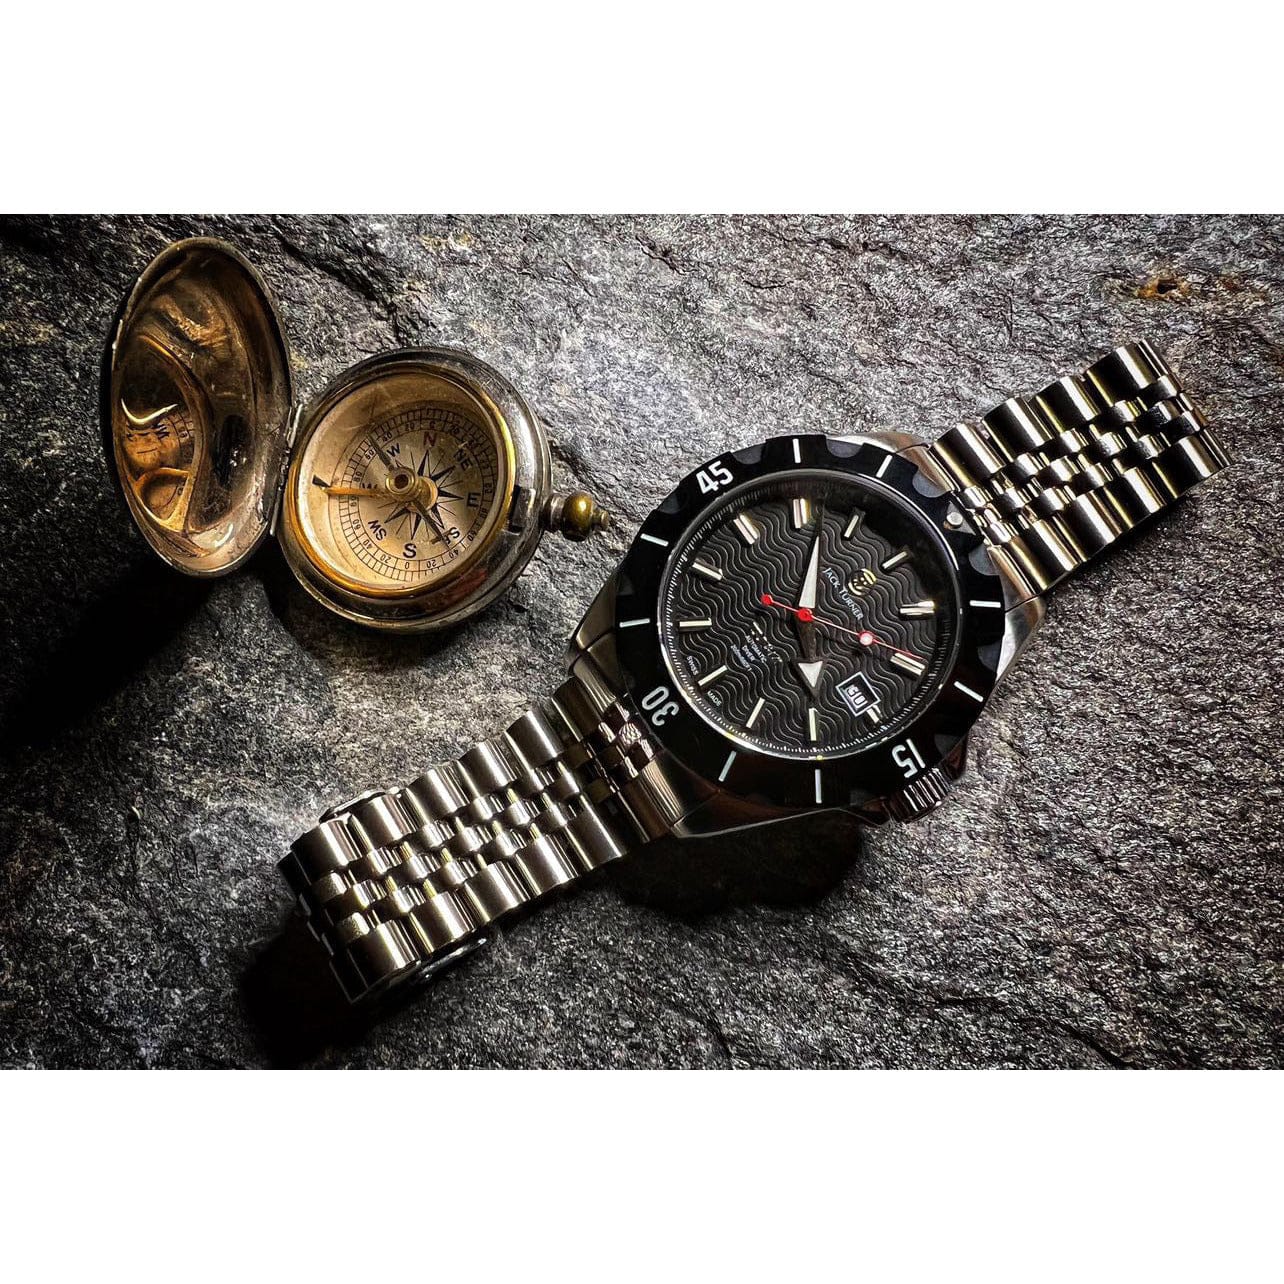 Jack Turner Watches Limited Edition Swiss Made Automatic Dive Watch the "TSUNAMI”